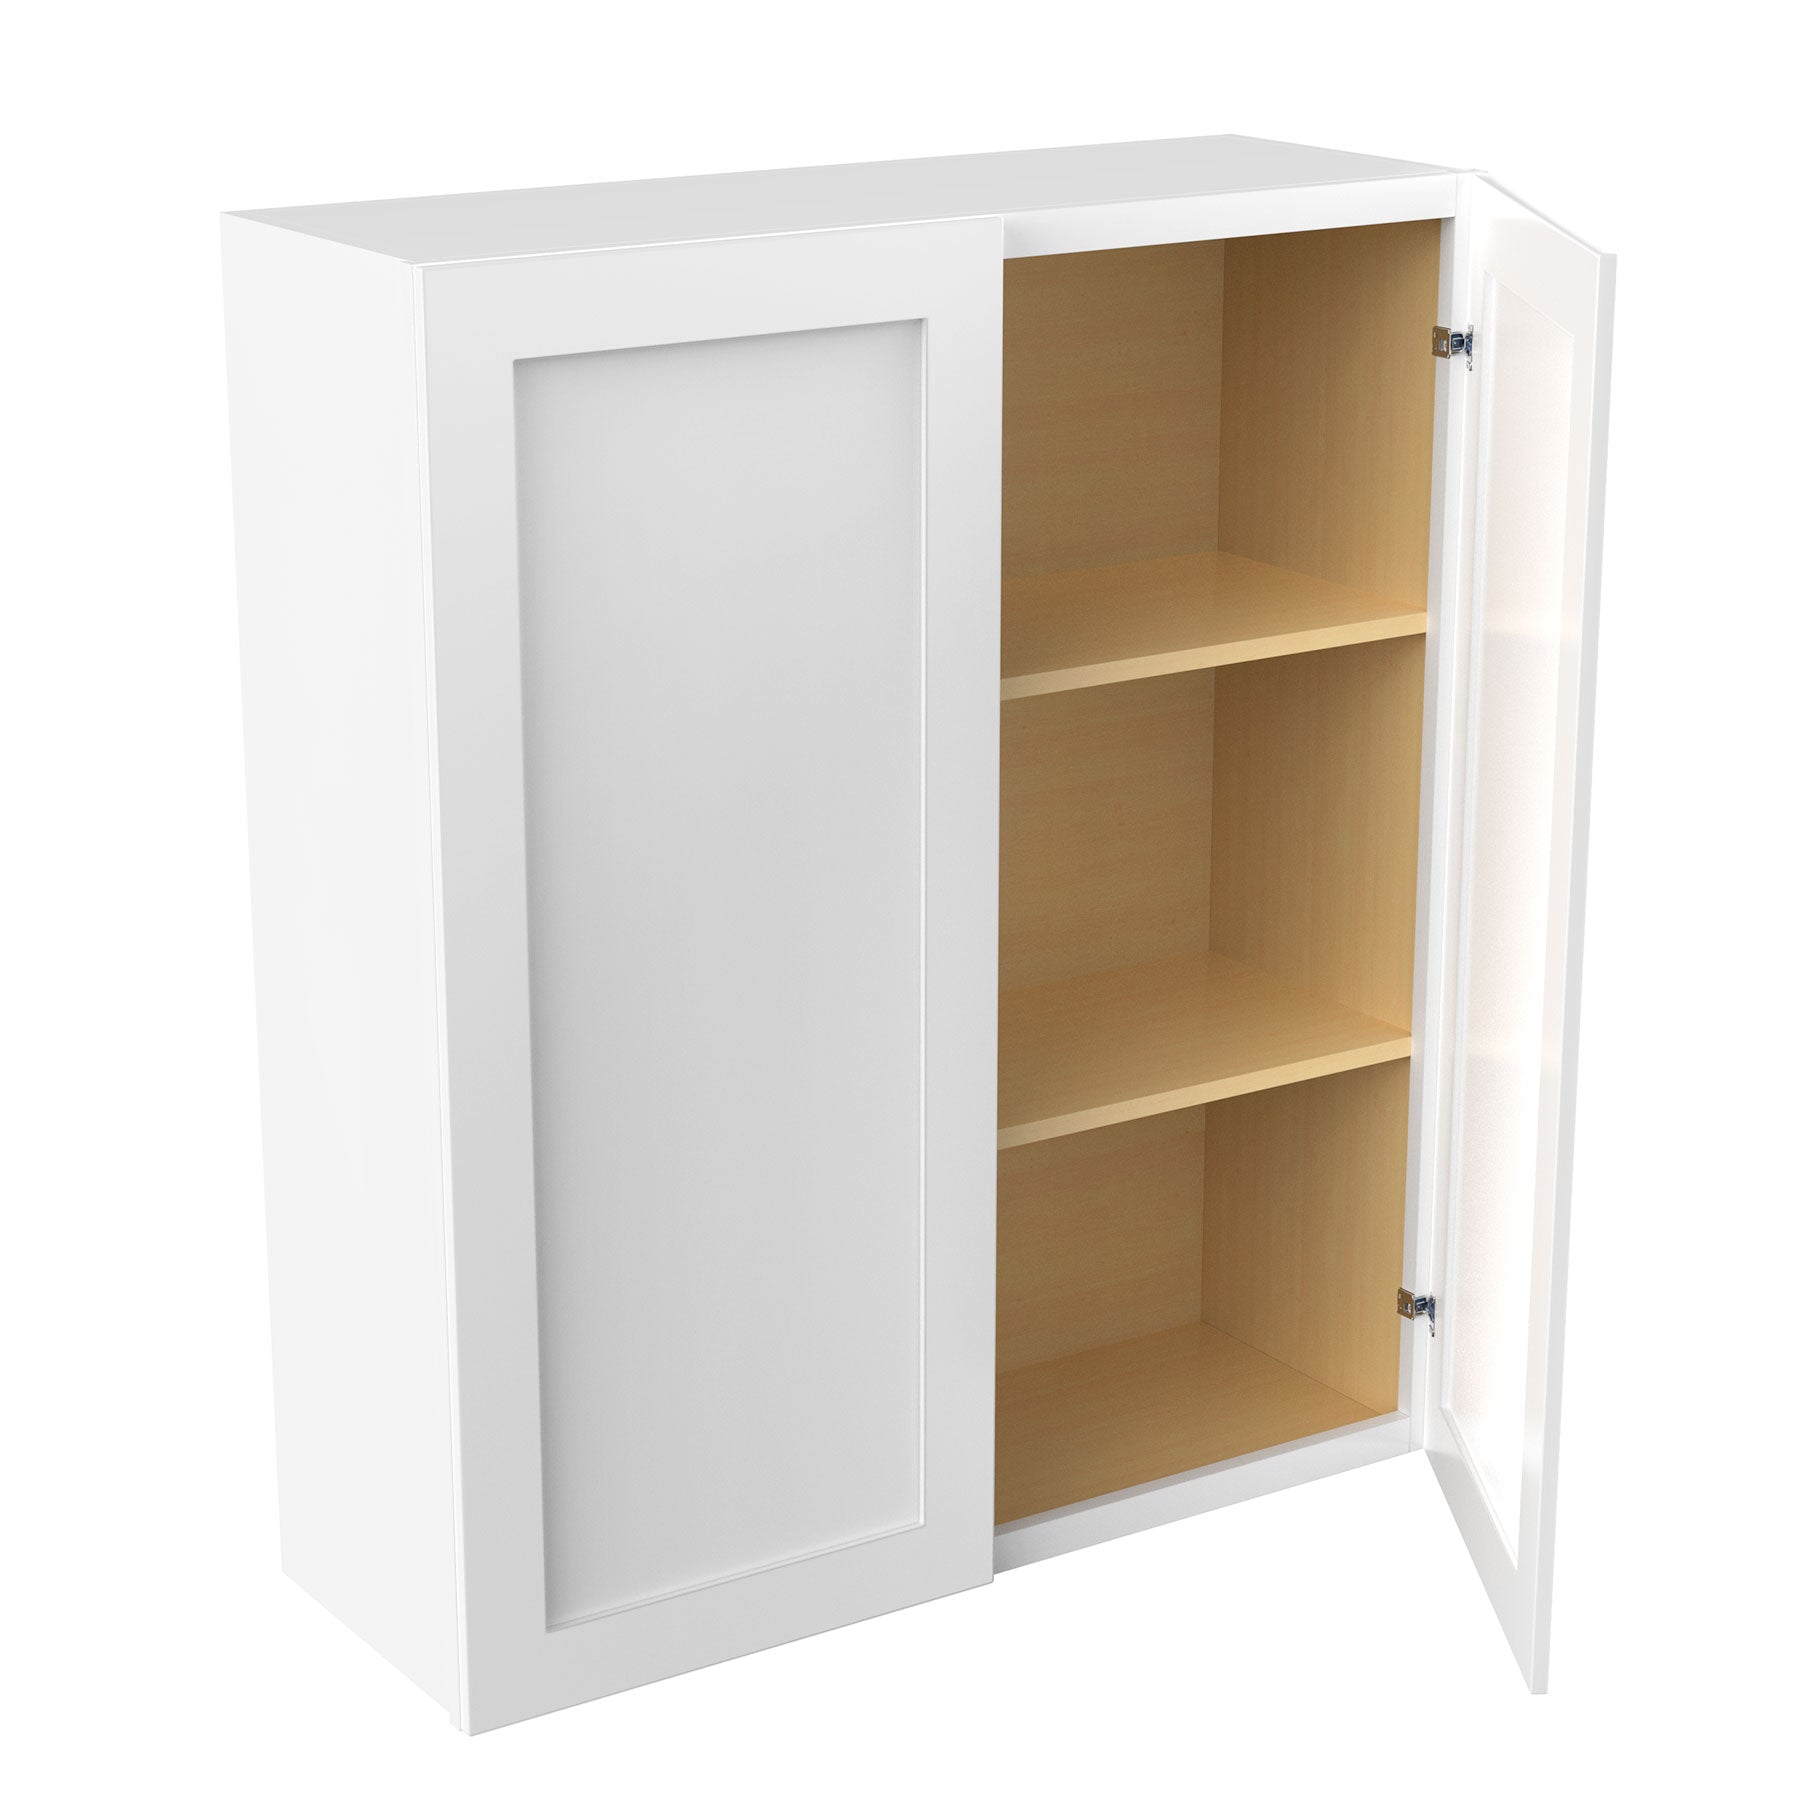 RTA - Elegant White - 42" High Double Door Wall Cabinet | 36"W x 42"H x 12"D